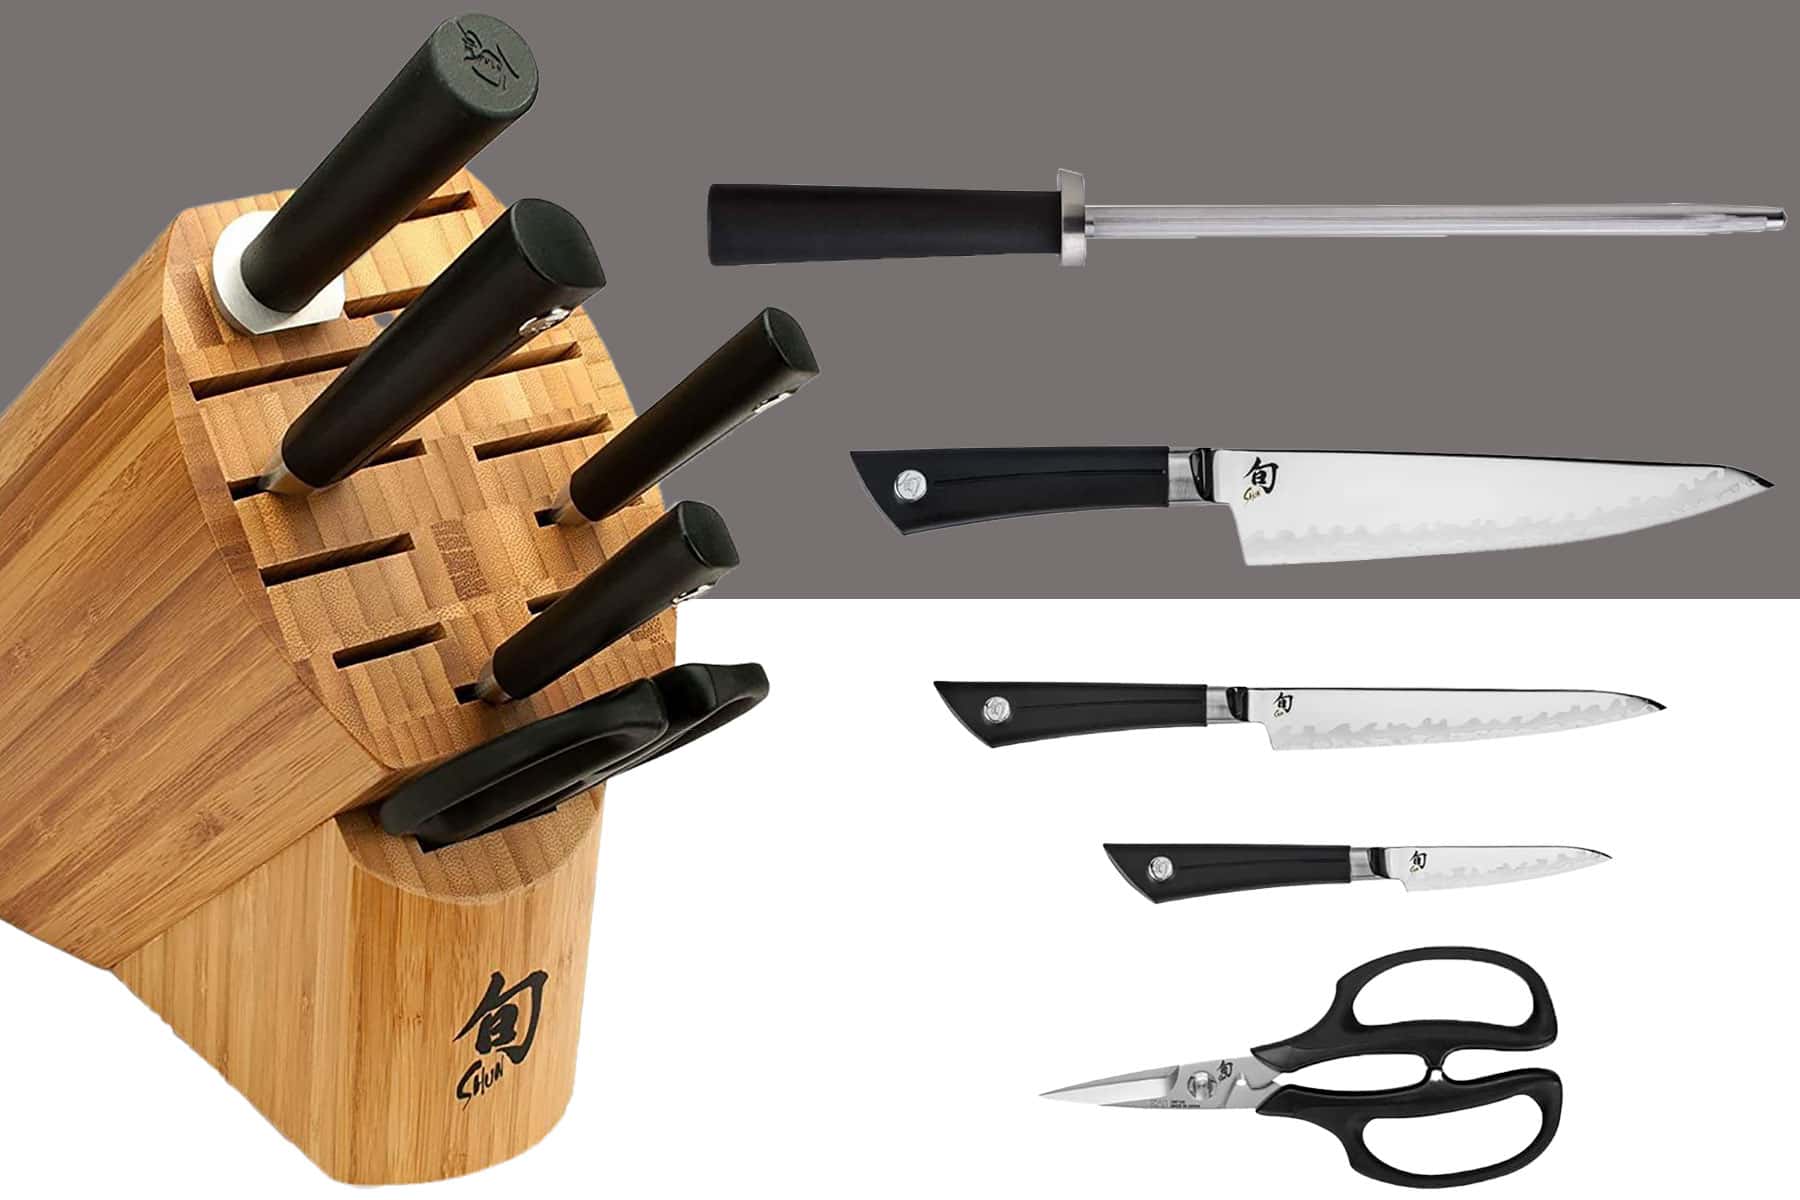 The Shun Sora six-piece knife set shown on the left inside its storage block and on the right with the knives outside the storage block.